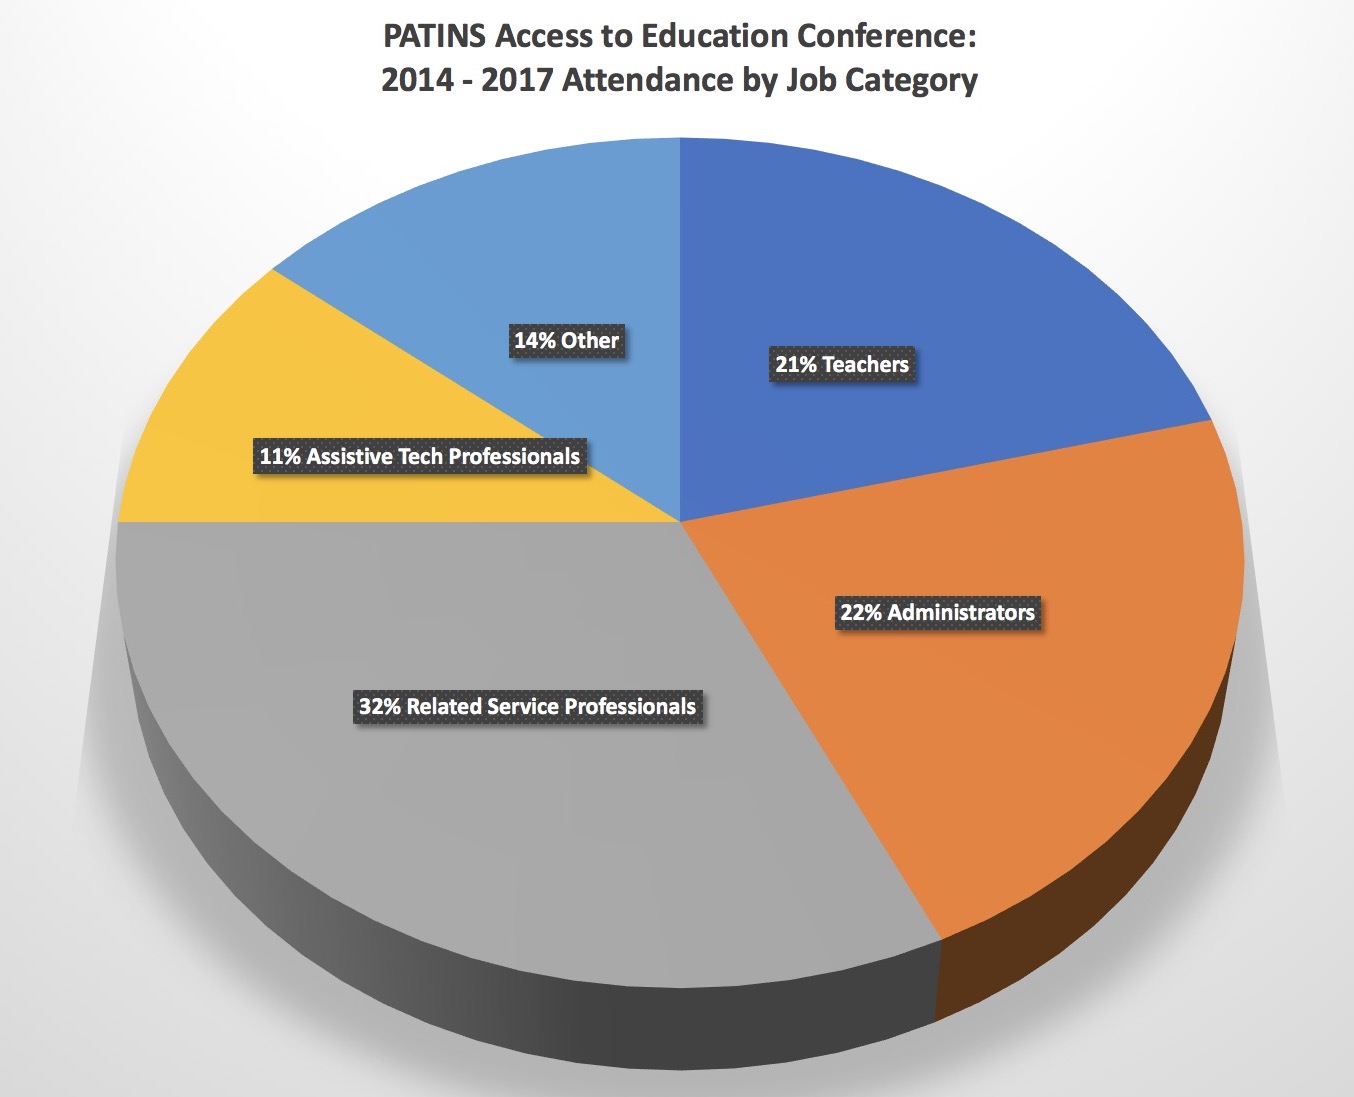 Pie Chart showing attendees from past 4 years of PATINS Conference: 22% Admin, 21% Teachers, 14% Other, 11% AT Professionals, 32% Related Service